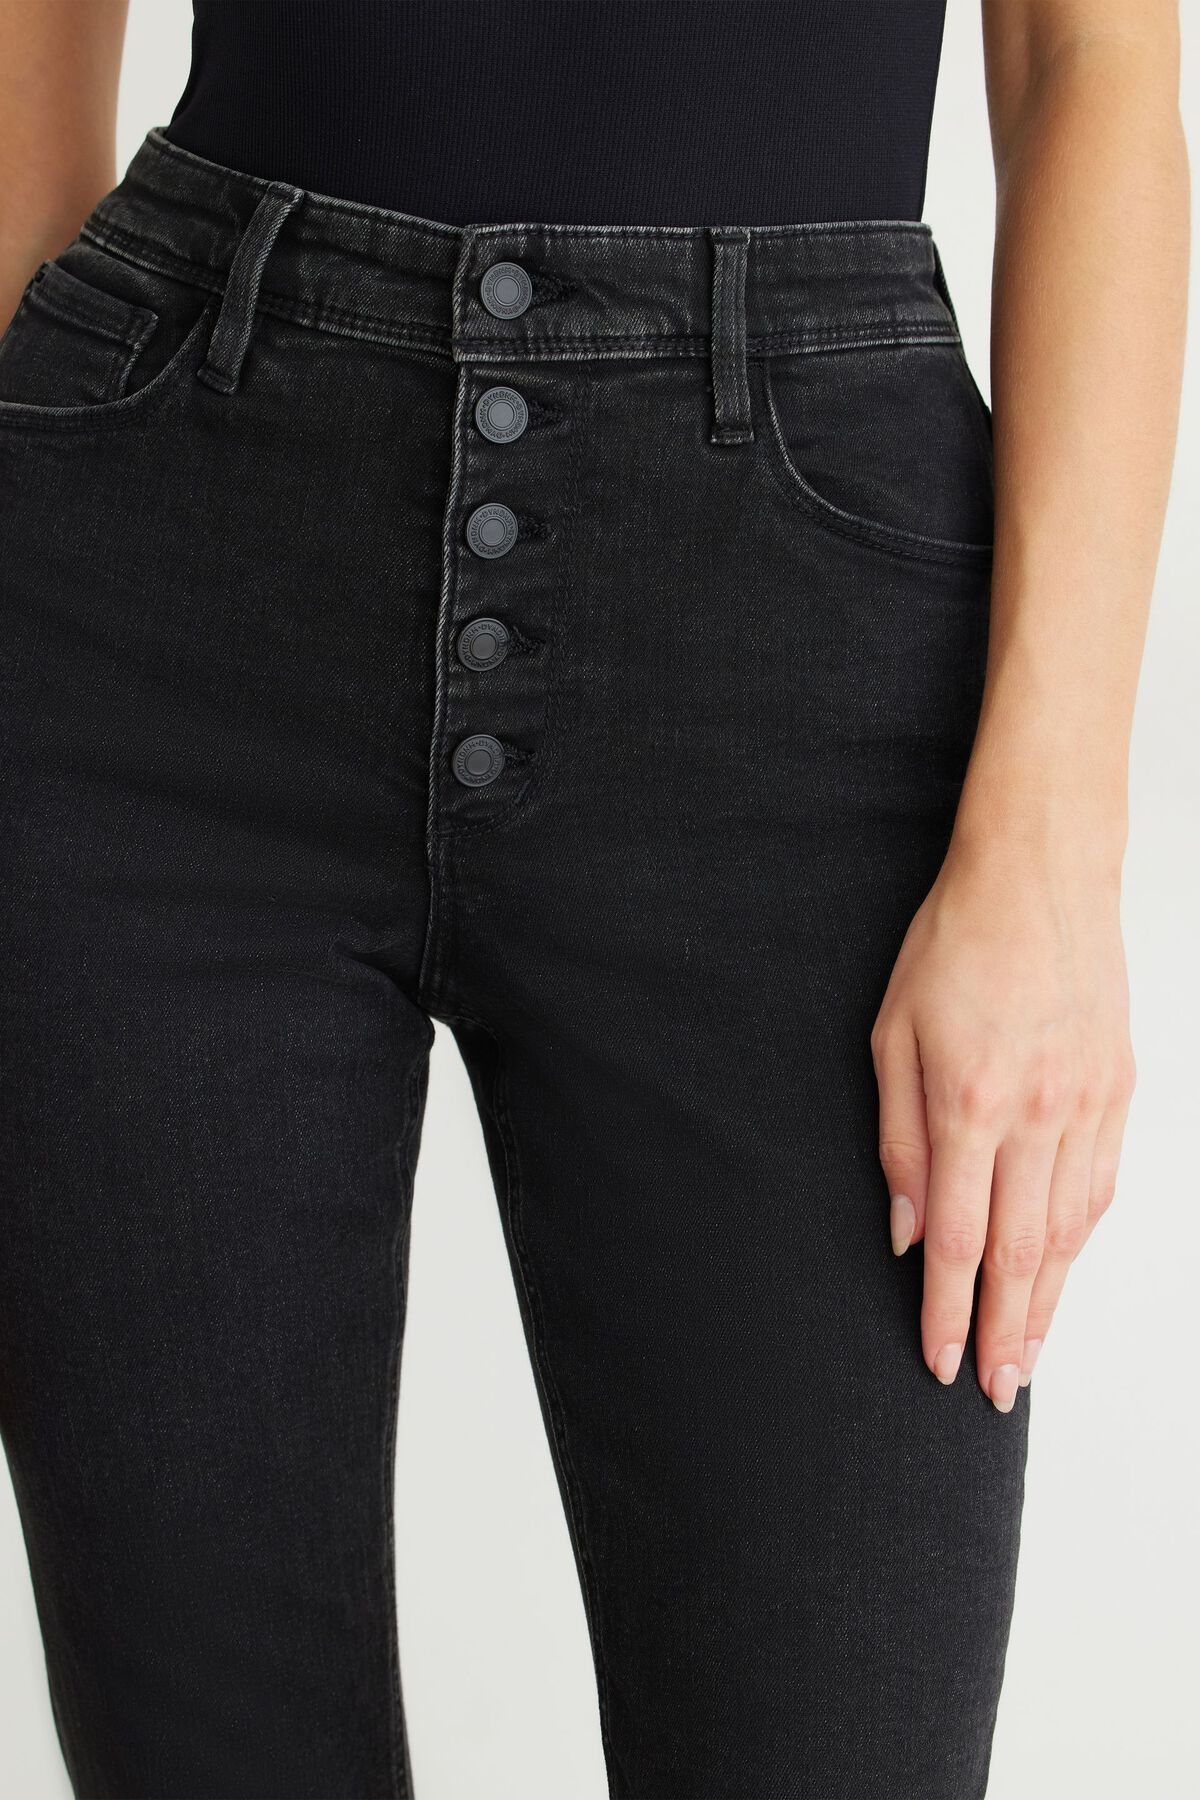 Dynamite Kate High Waist Button Front Jeans. 2